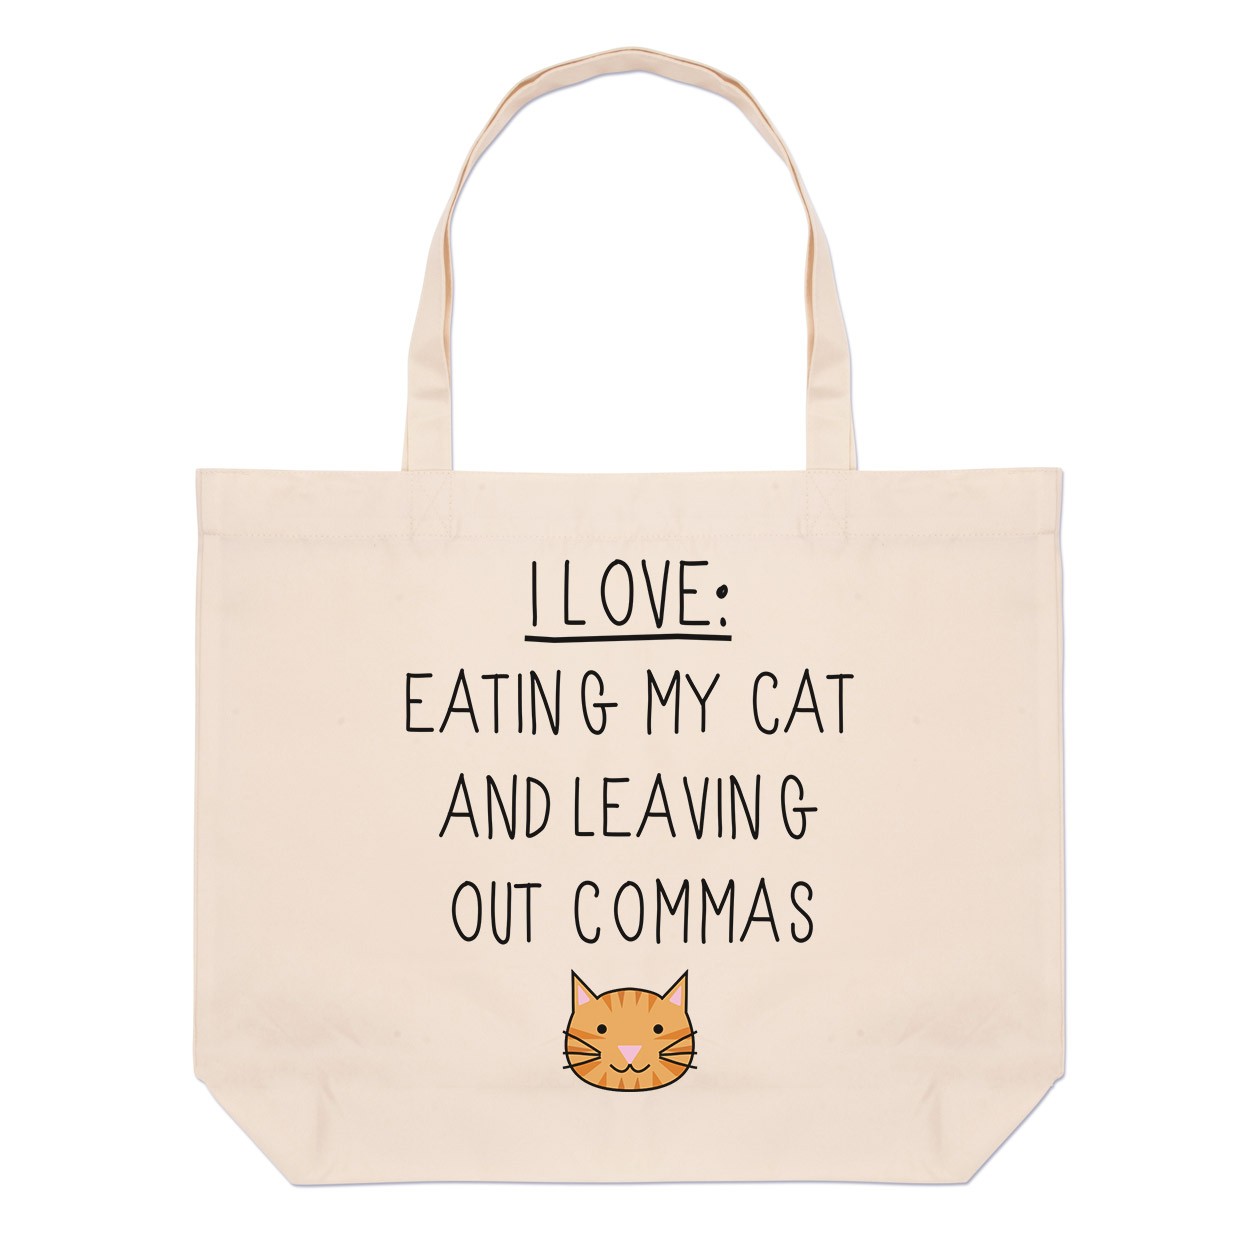 I Love Eating My Cat and Leaving Out Commas Large Beach Tote Bag